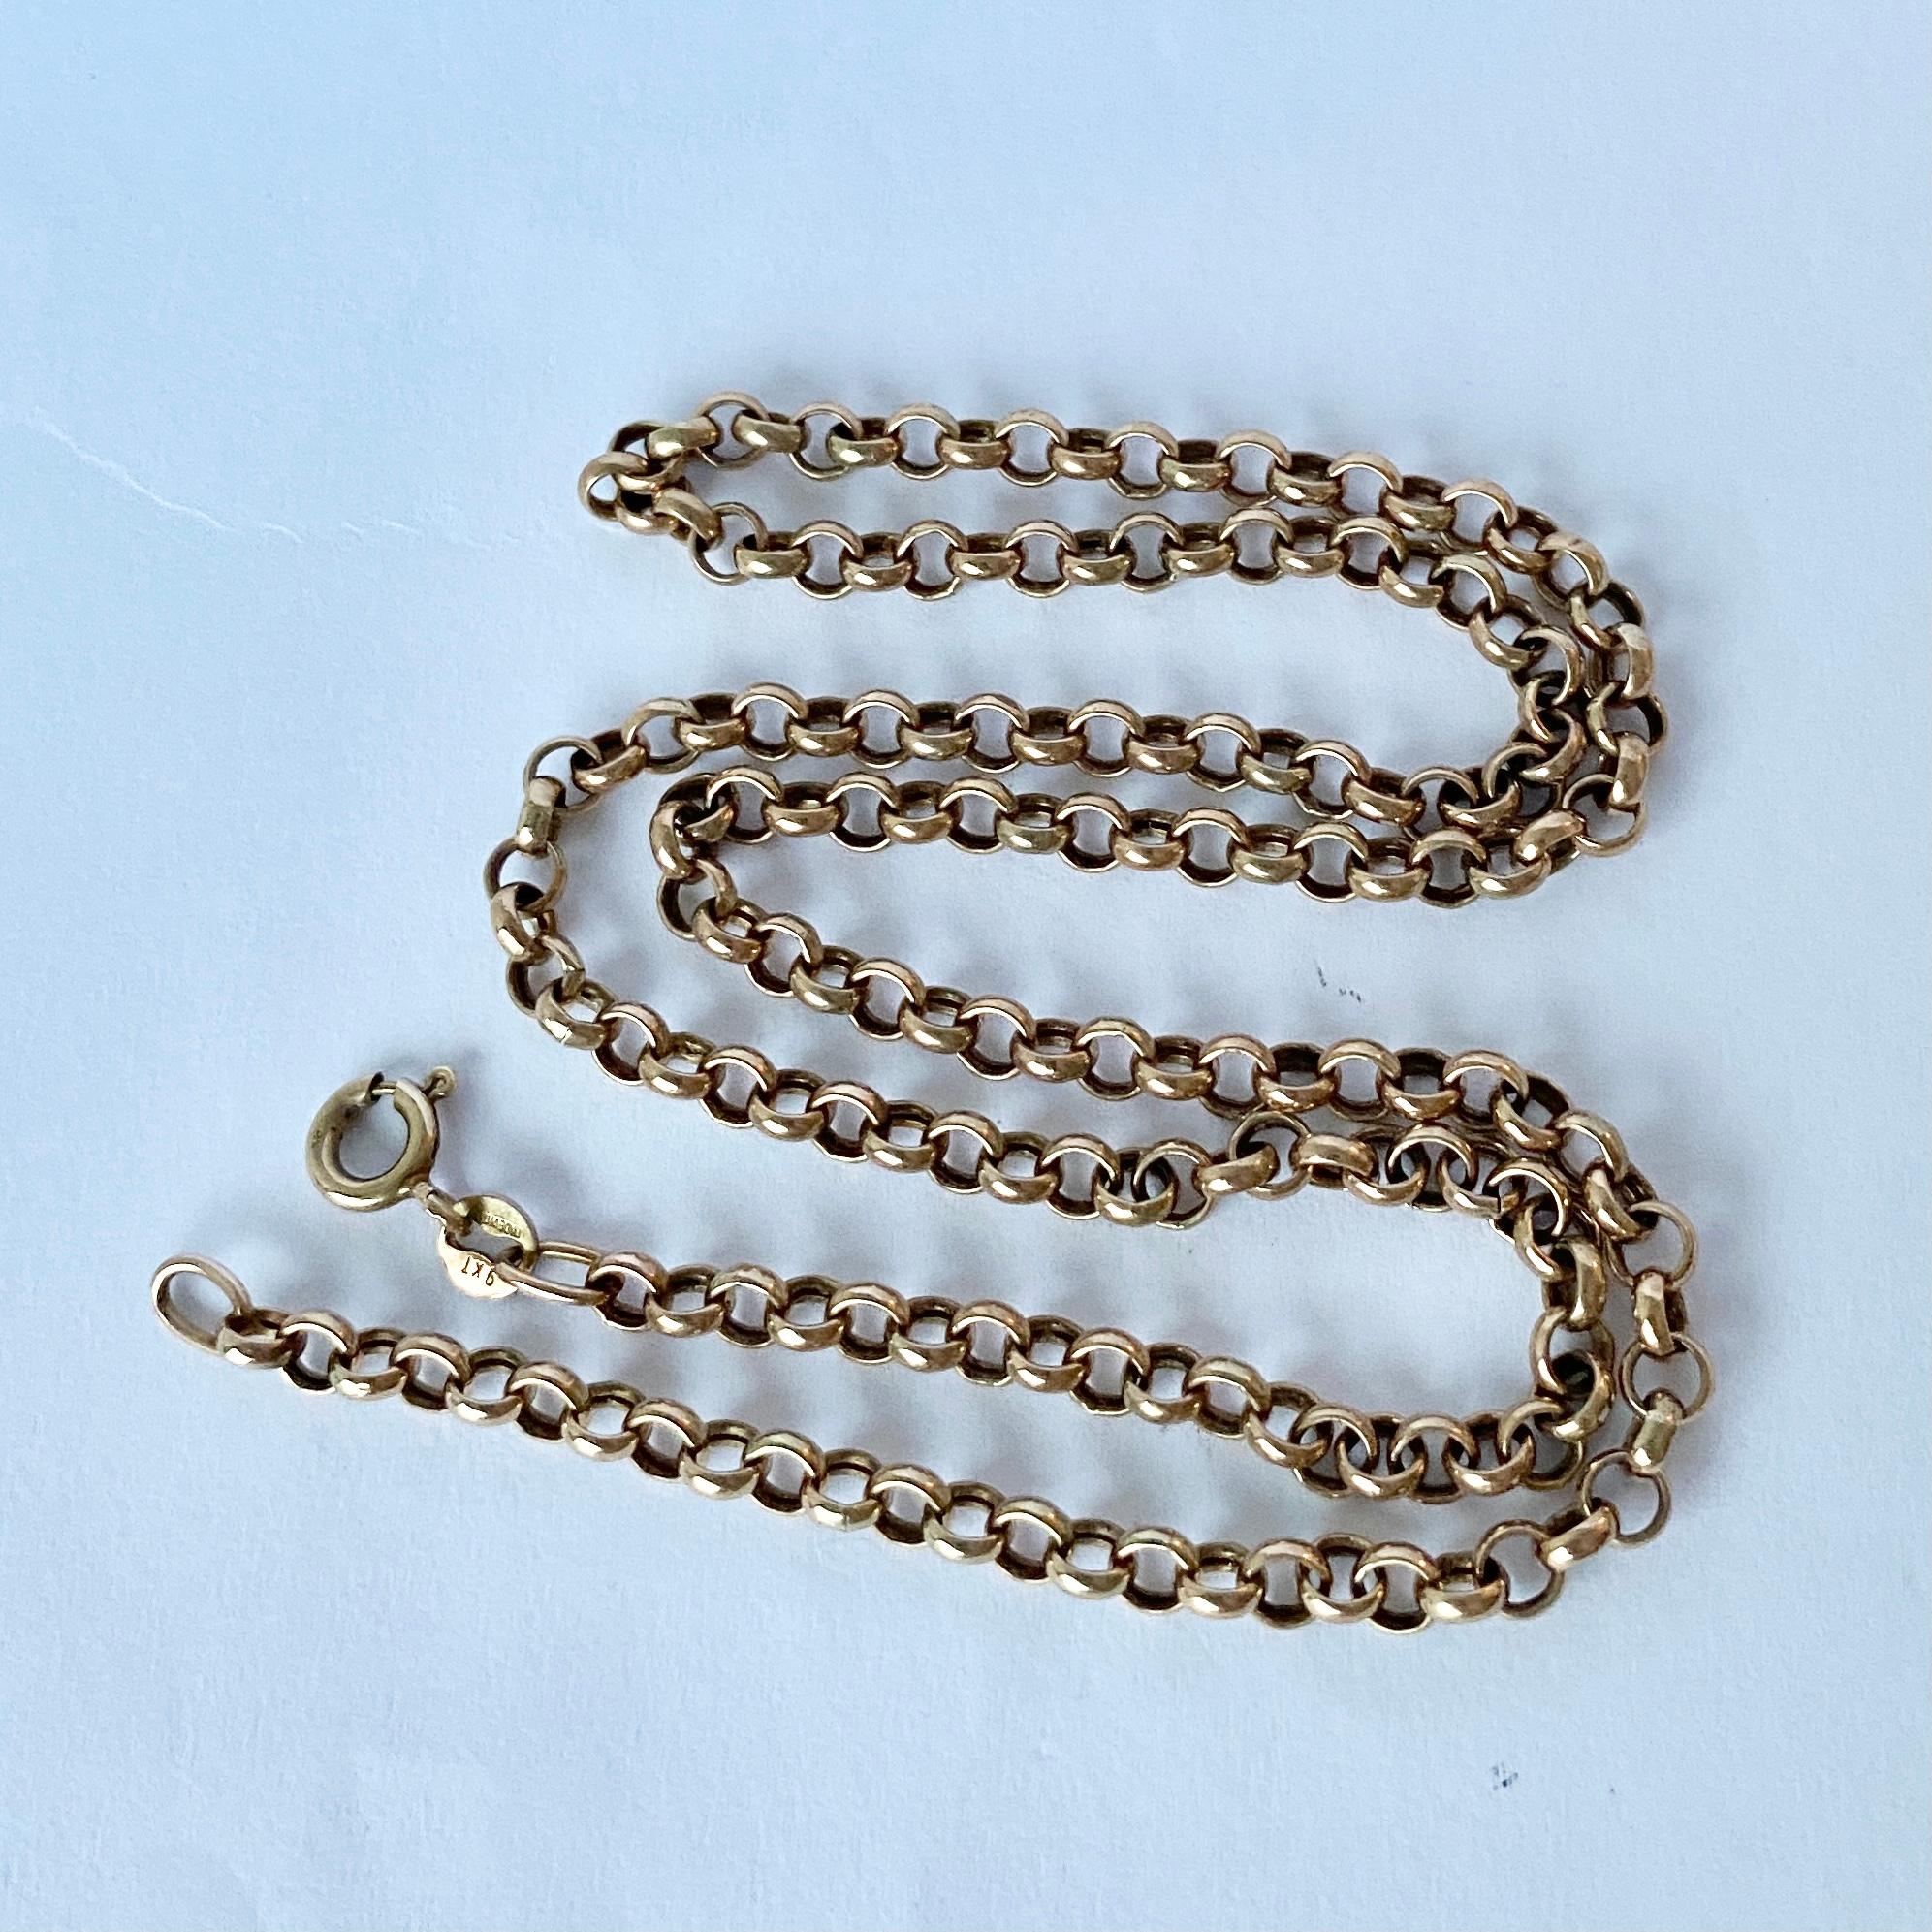 This lovely necklace is simple and the belcher style chain gives the necklace a fine look. The necklace is fastened using a bolt ring clasp. 

Length: 47cm 
Chain Width: 3.5mm

Weight: 4.4g